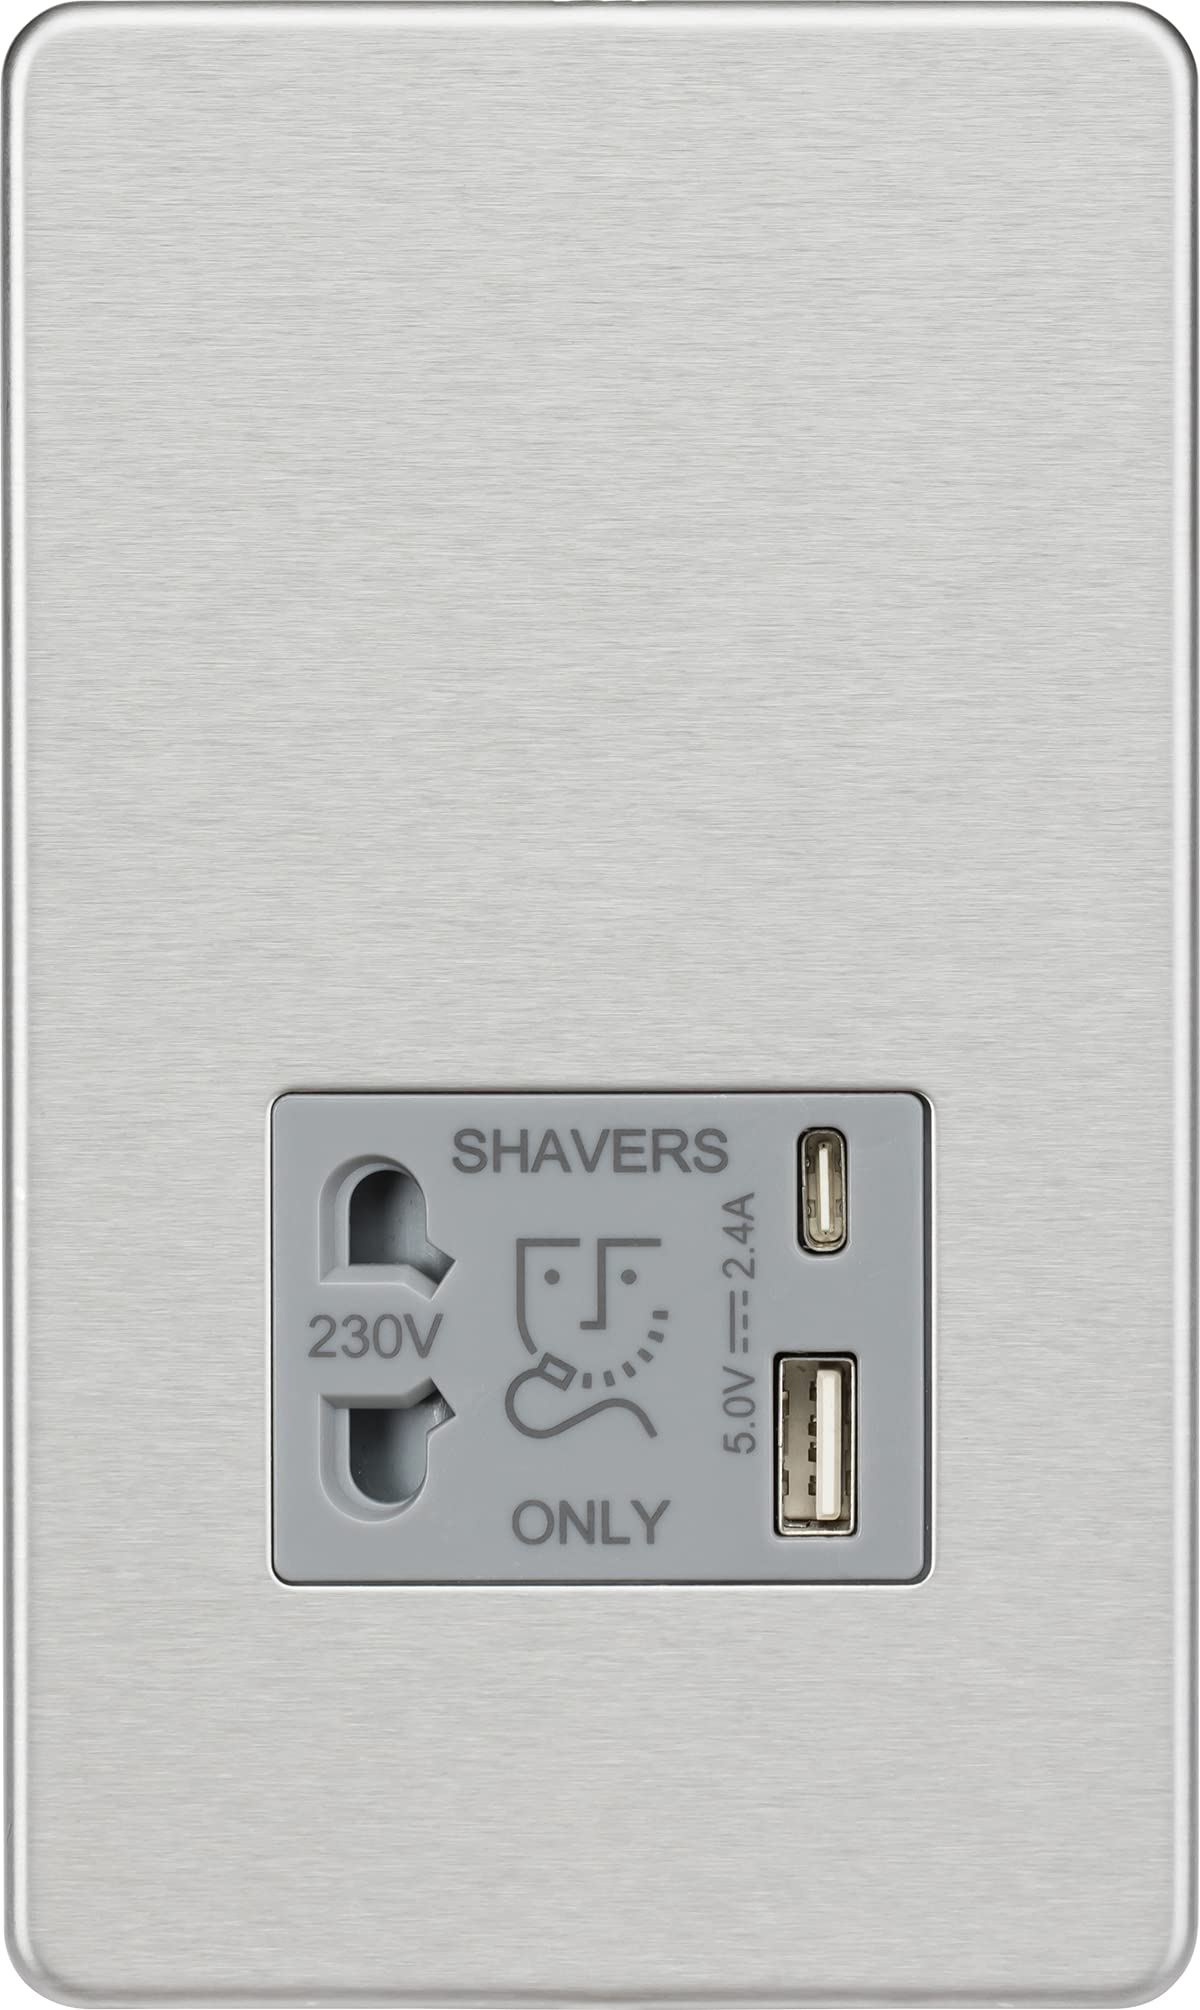 Knightsbridge Screwless Shaver Socket with Dual USB A+C (5V DC 2.4A Shared) - Brushed Chrome with Grey Insert